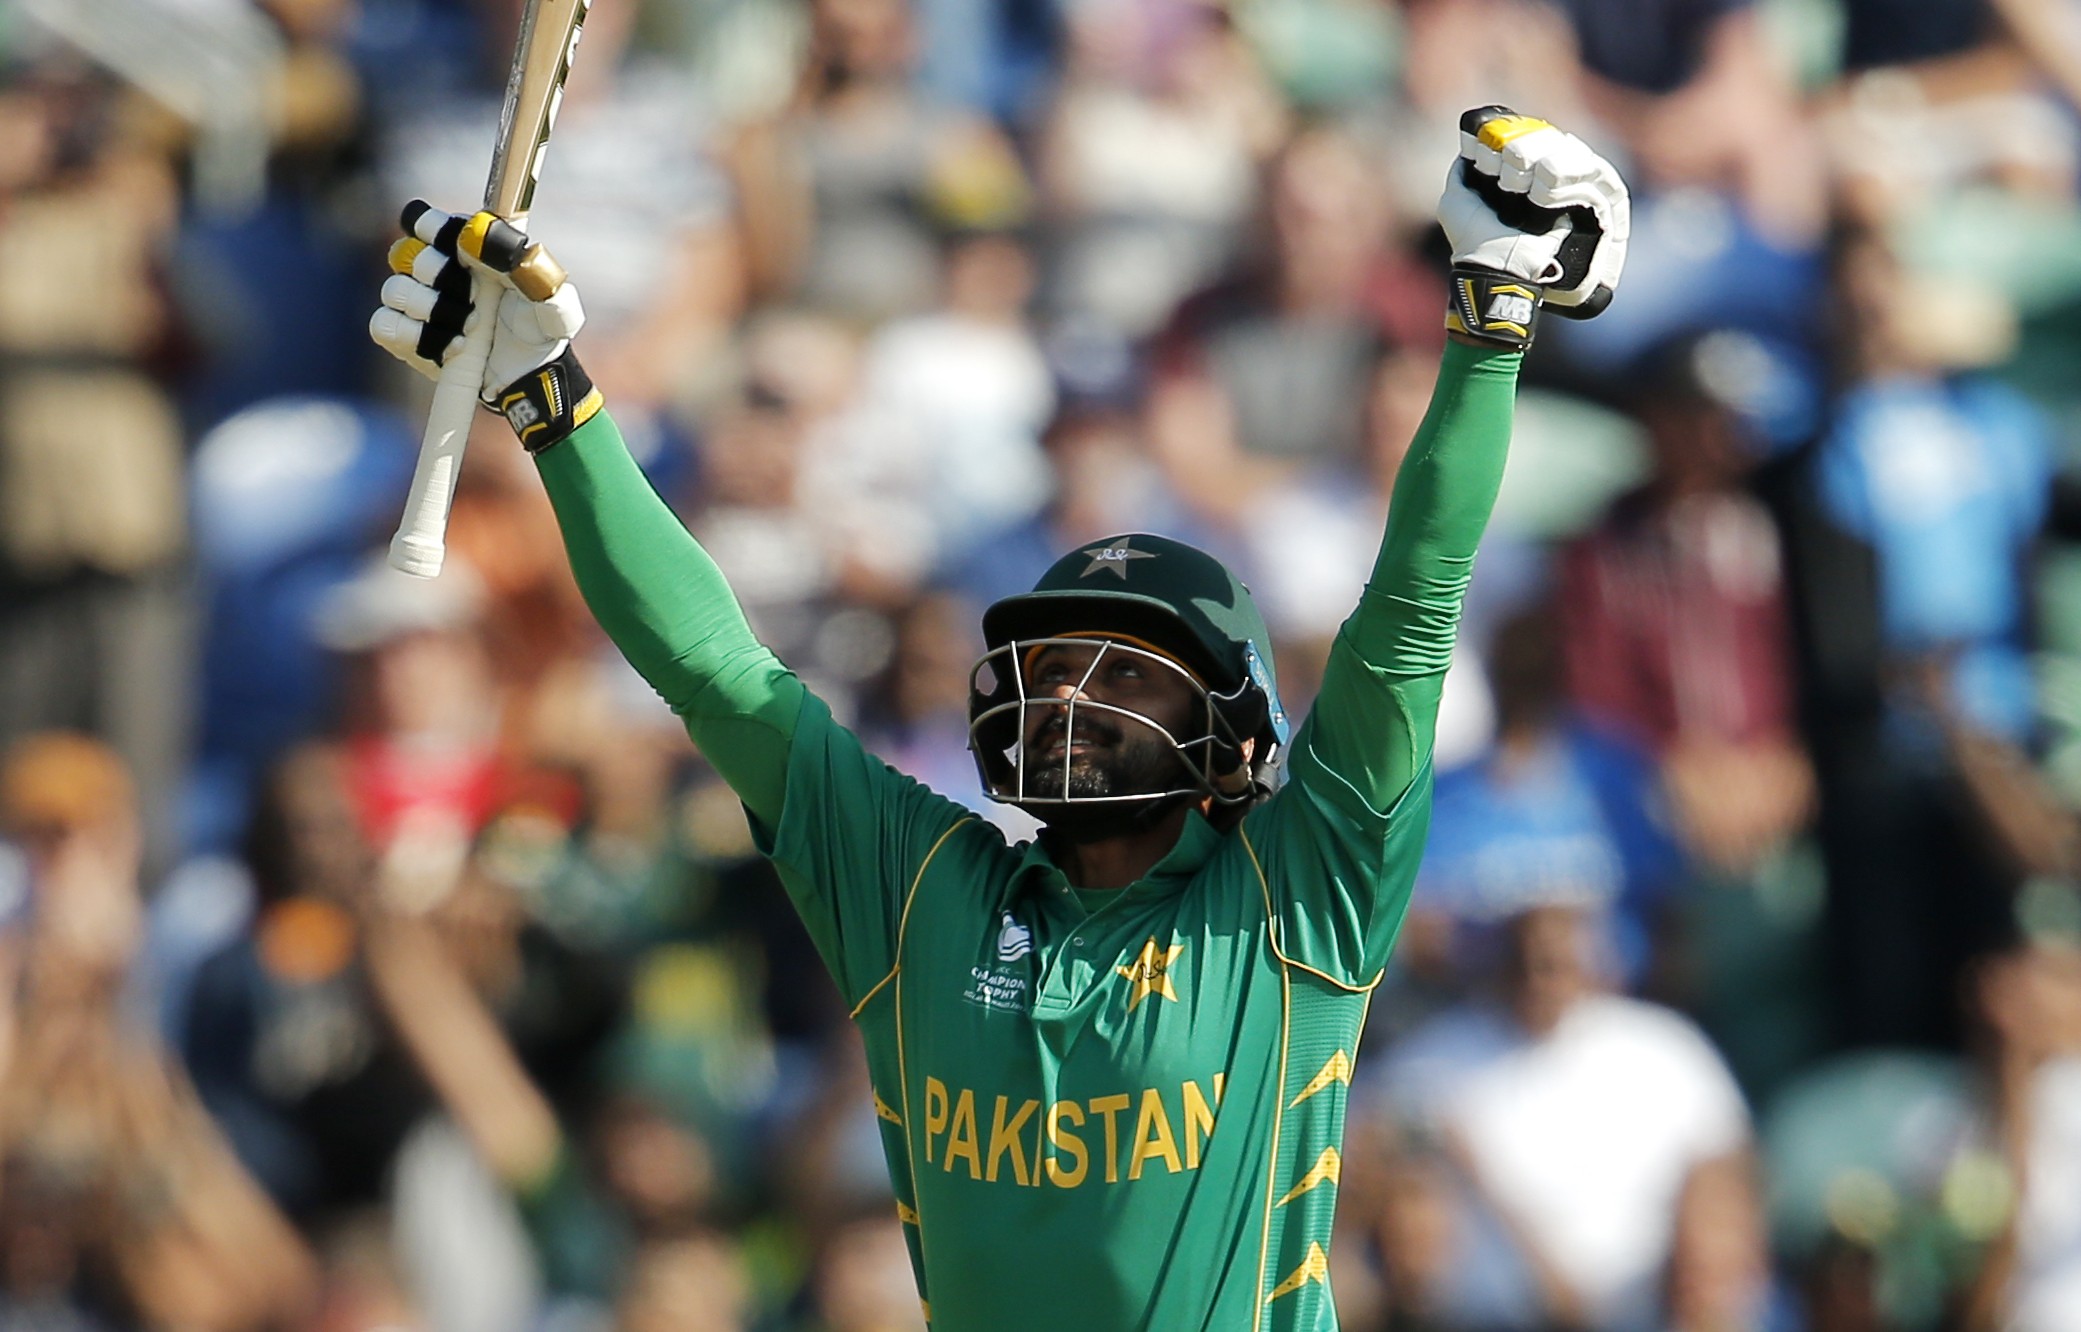 Pakistan's Mohammad Hafeez celebrates after winning the match against England in the semi-finals of the Champions Trophy tournament. Photo: Reuters